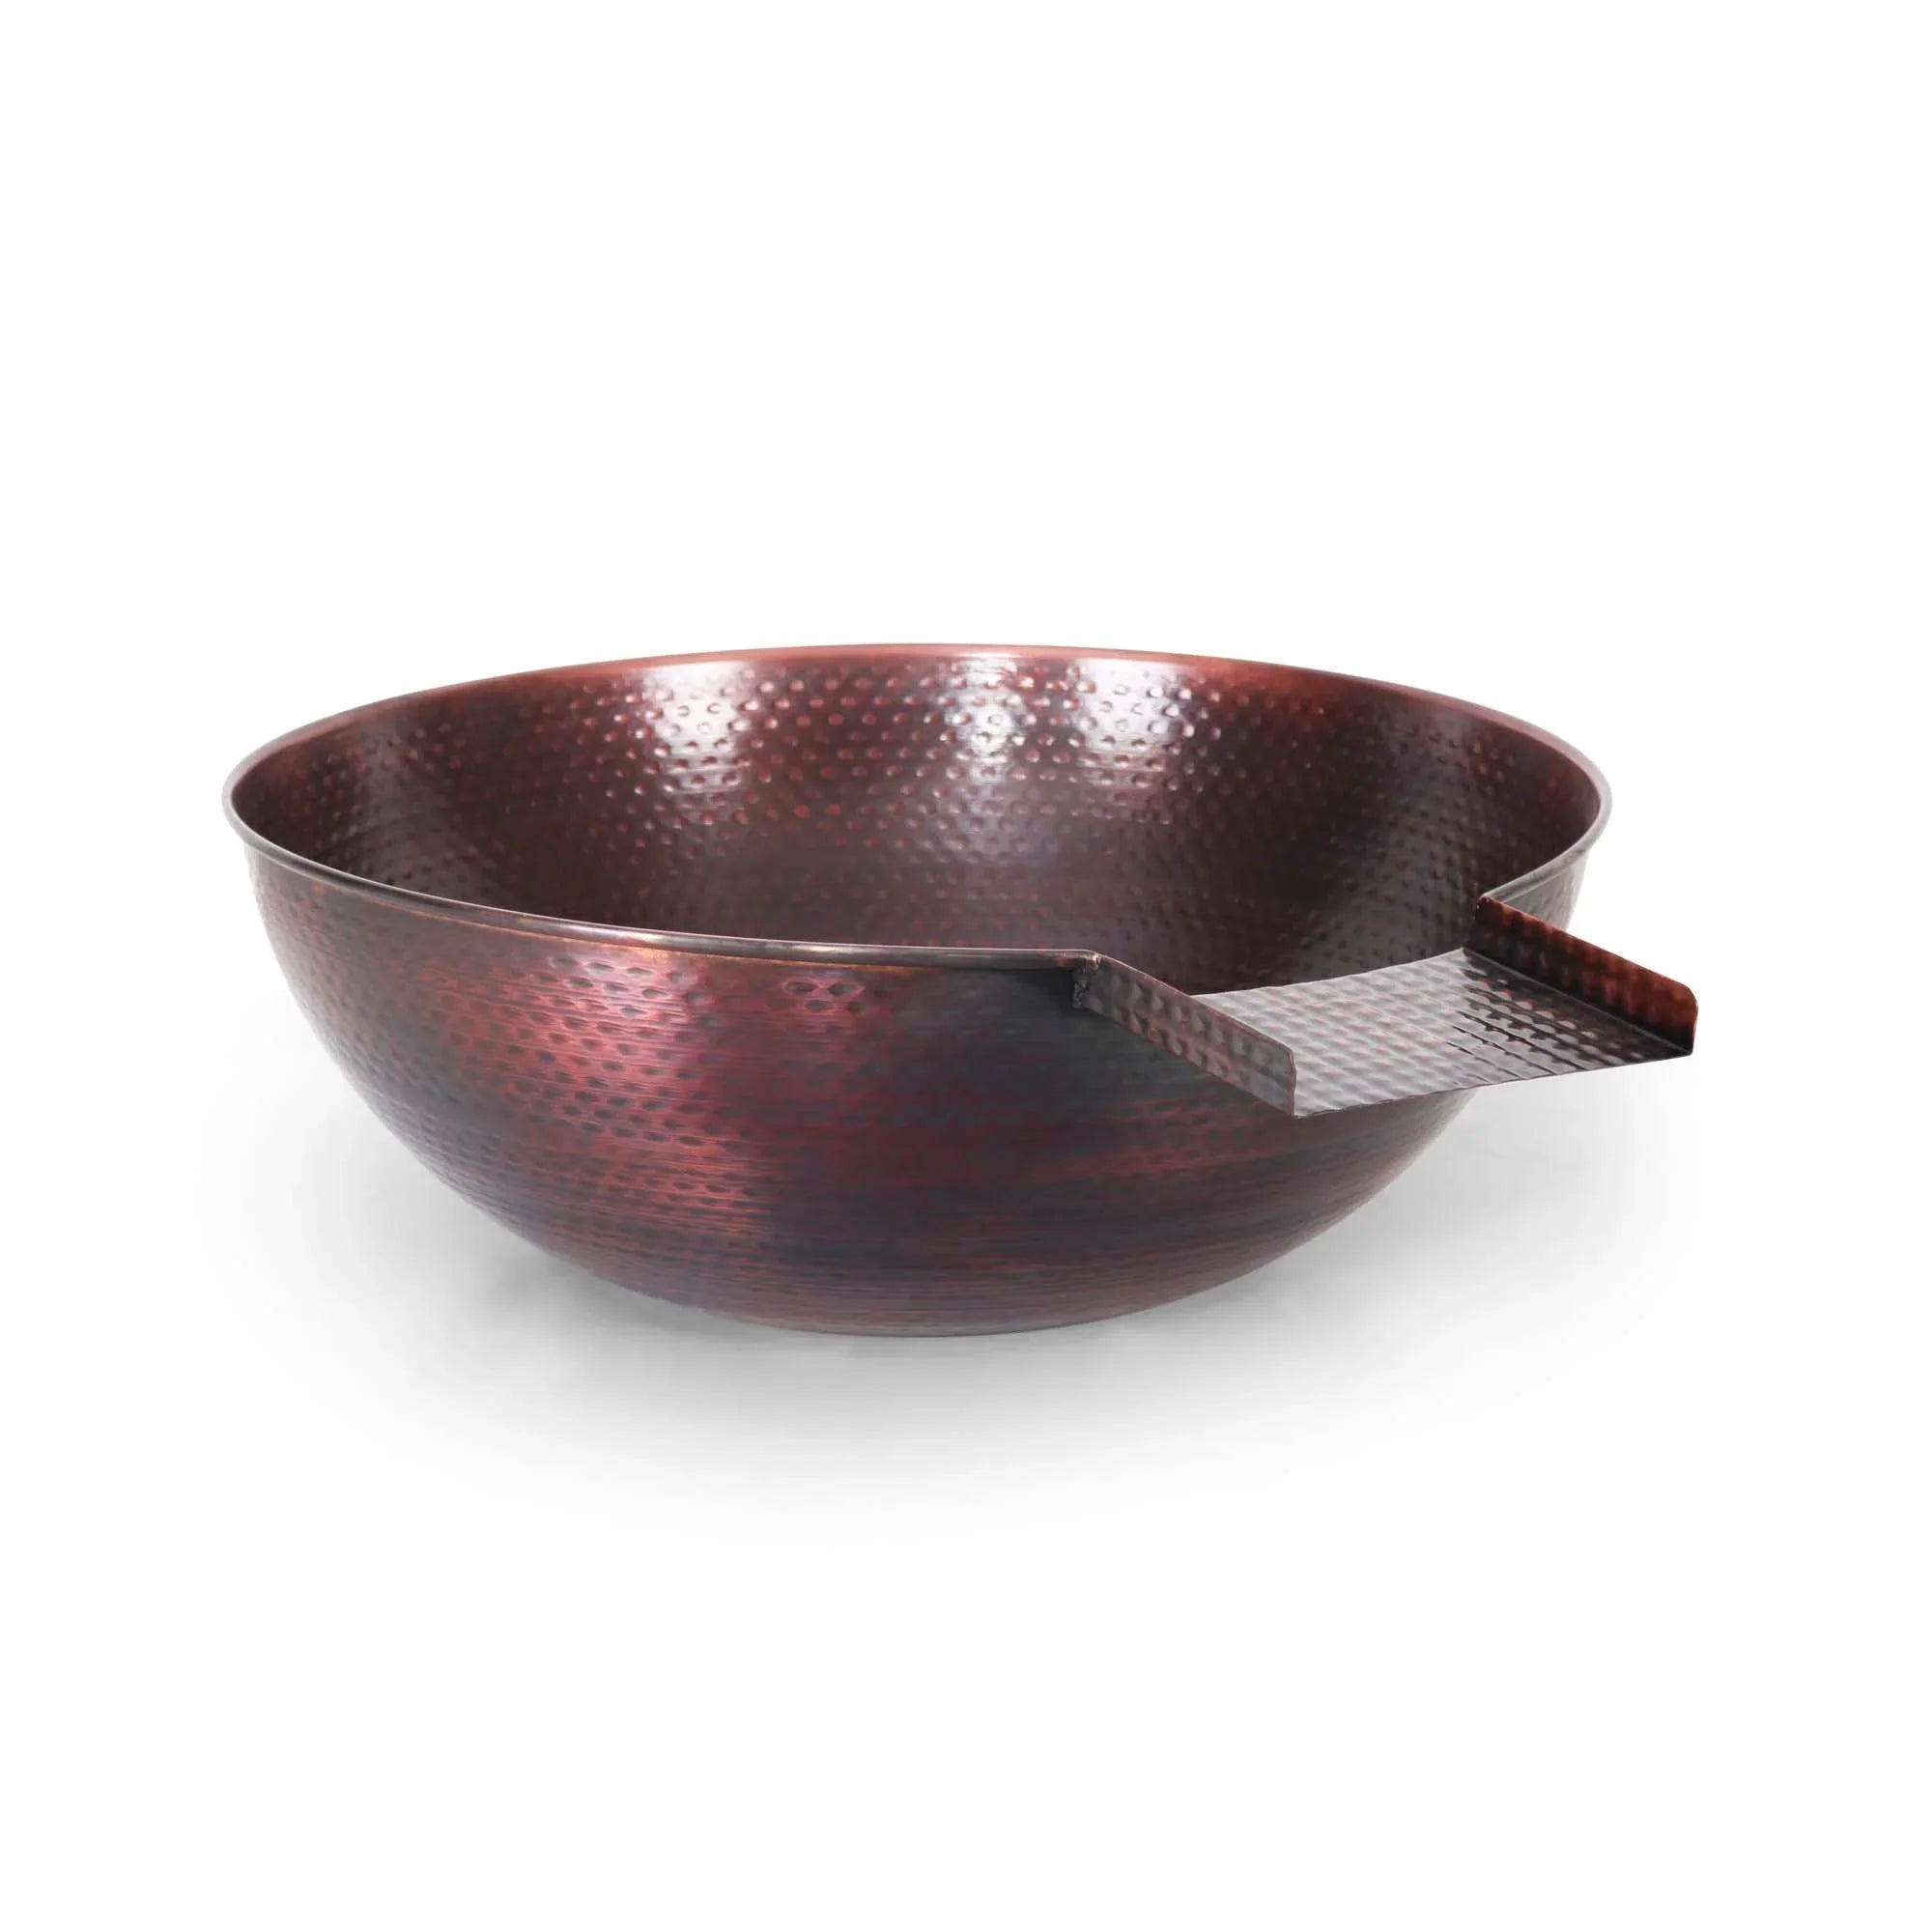 The Outdoor Plus Sedona Copper Water Bowl